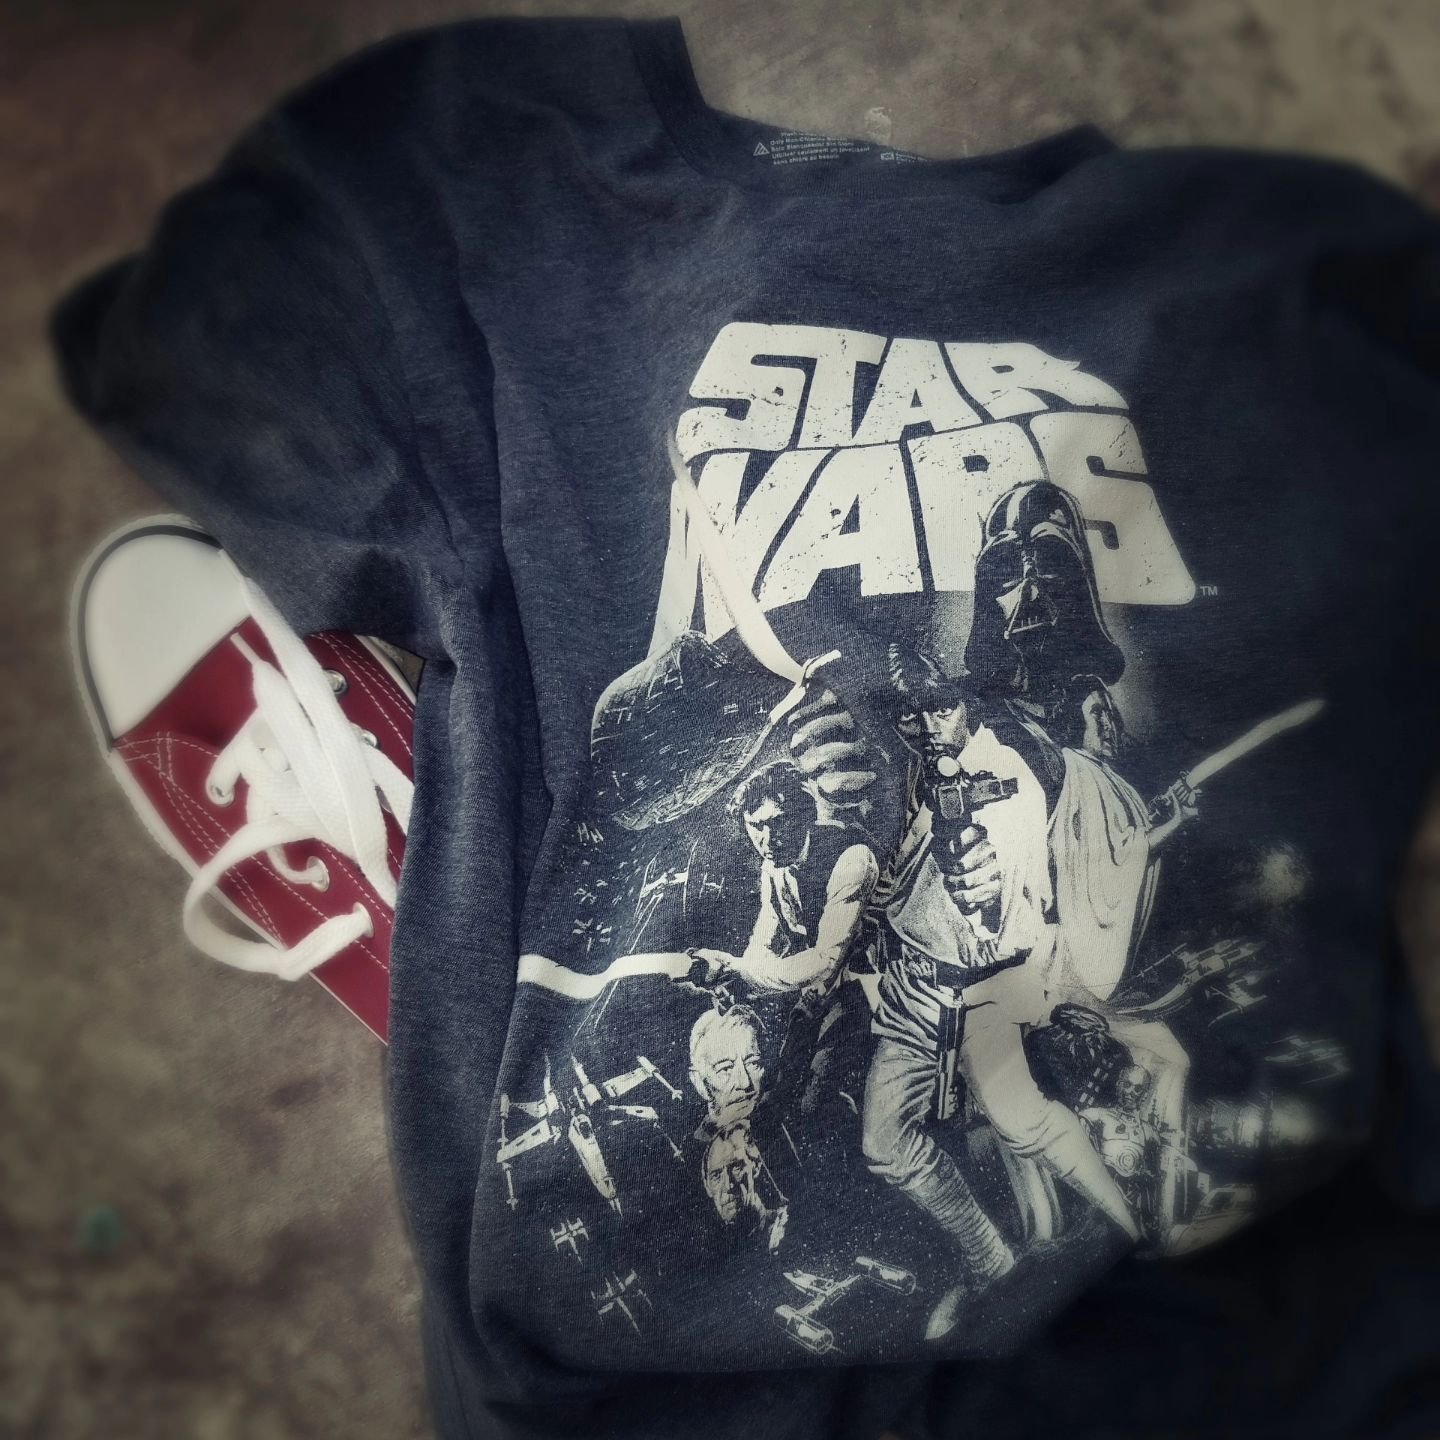 May the 4th be with you! And a sneaky pic of my daughter (she took this pic without me knowing, lol).

#starwars #maythe4thbewithyou #shirt #redshoes #daughter #family